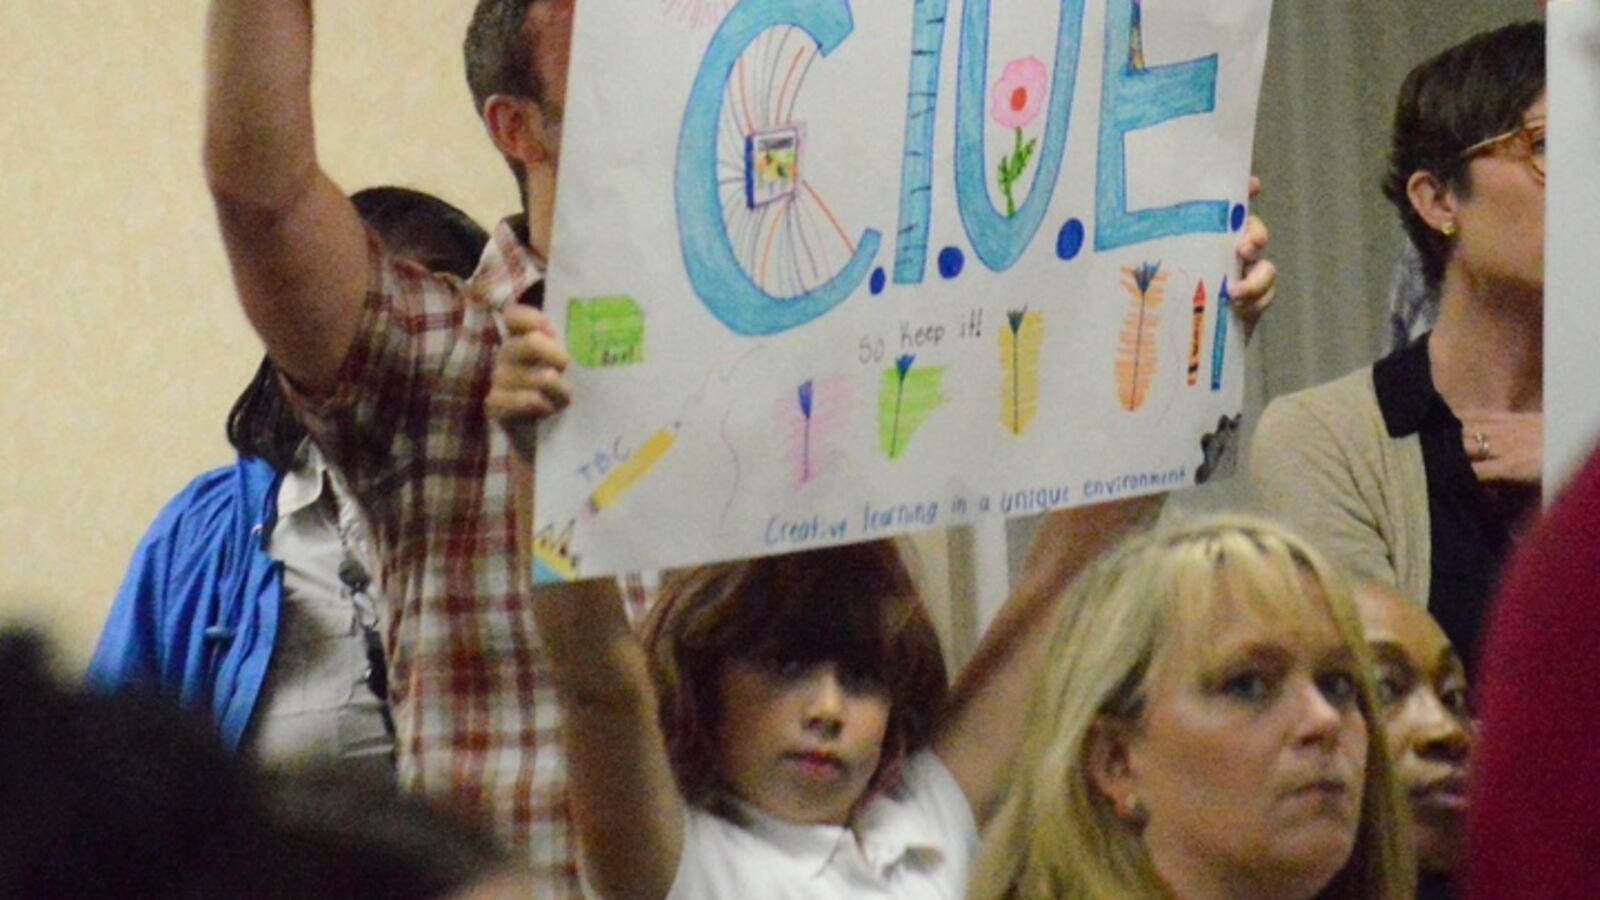 CLUE supporters hold up signs at a budget work session on April 6 when Shelby County's school board began reviewing a proposed spending plan that would cut $50 million from district programs and classrooms.